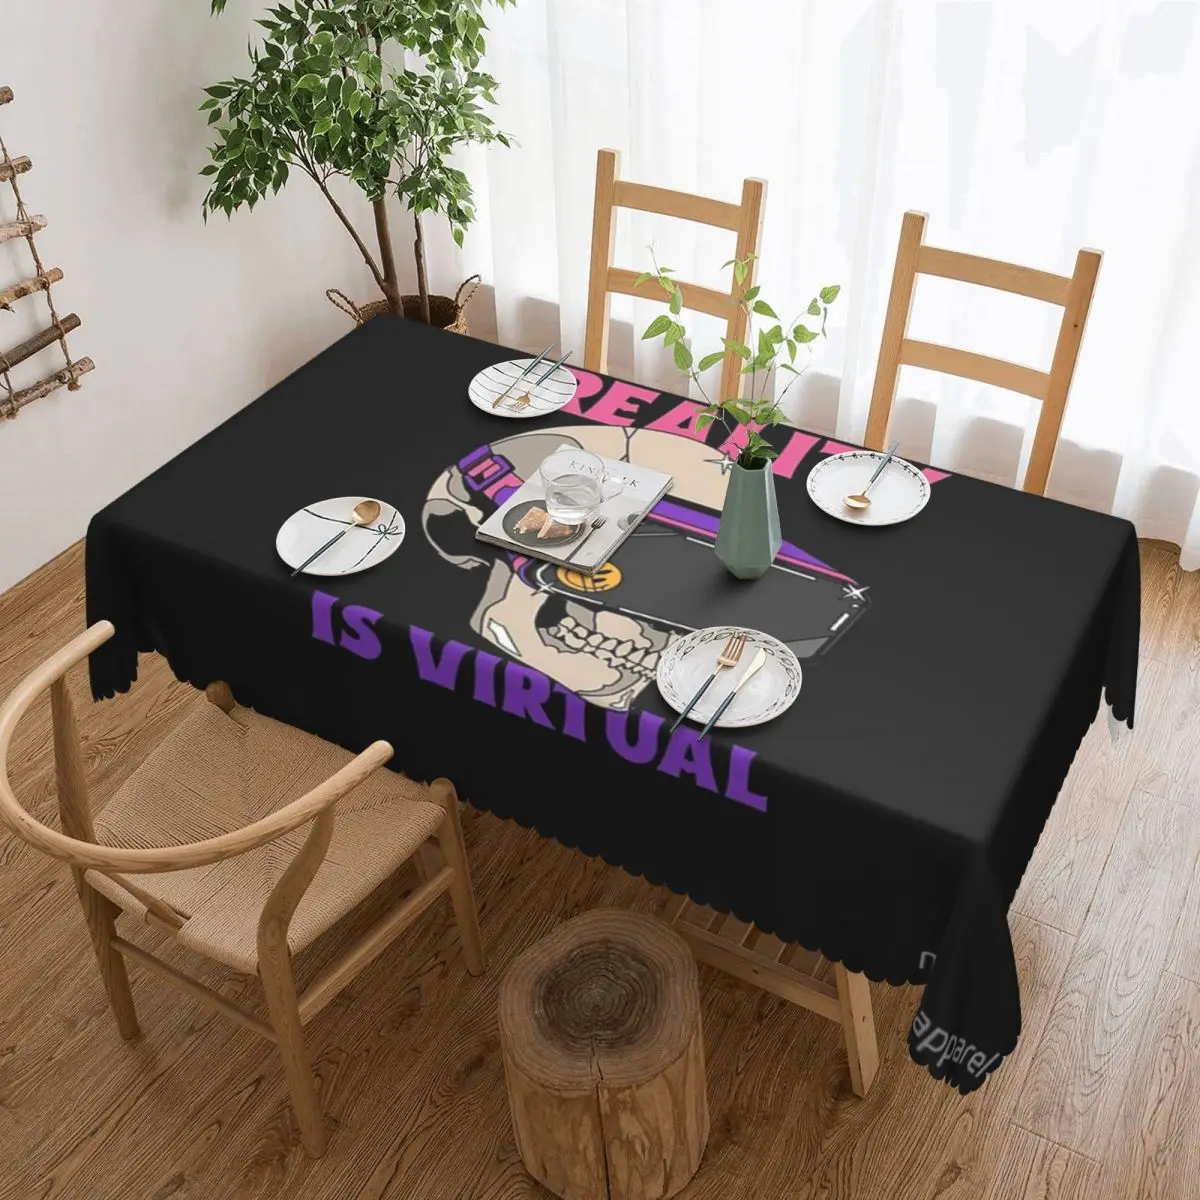 

MY REALITY IS VIRTUAL Tablecloth 54x72in soft Protecting Table Festive Decor